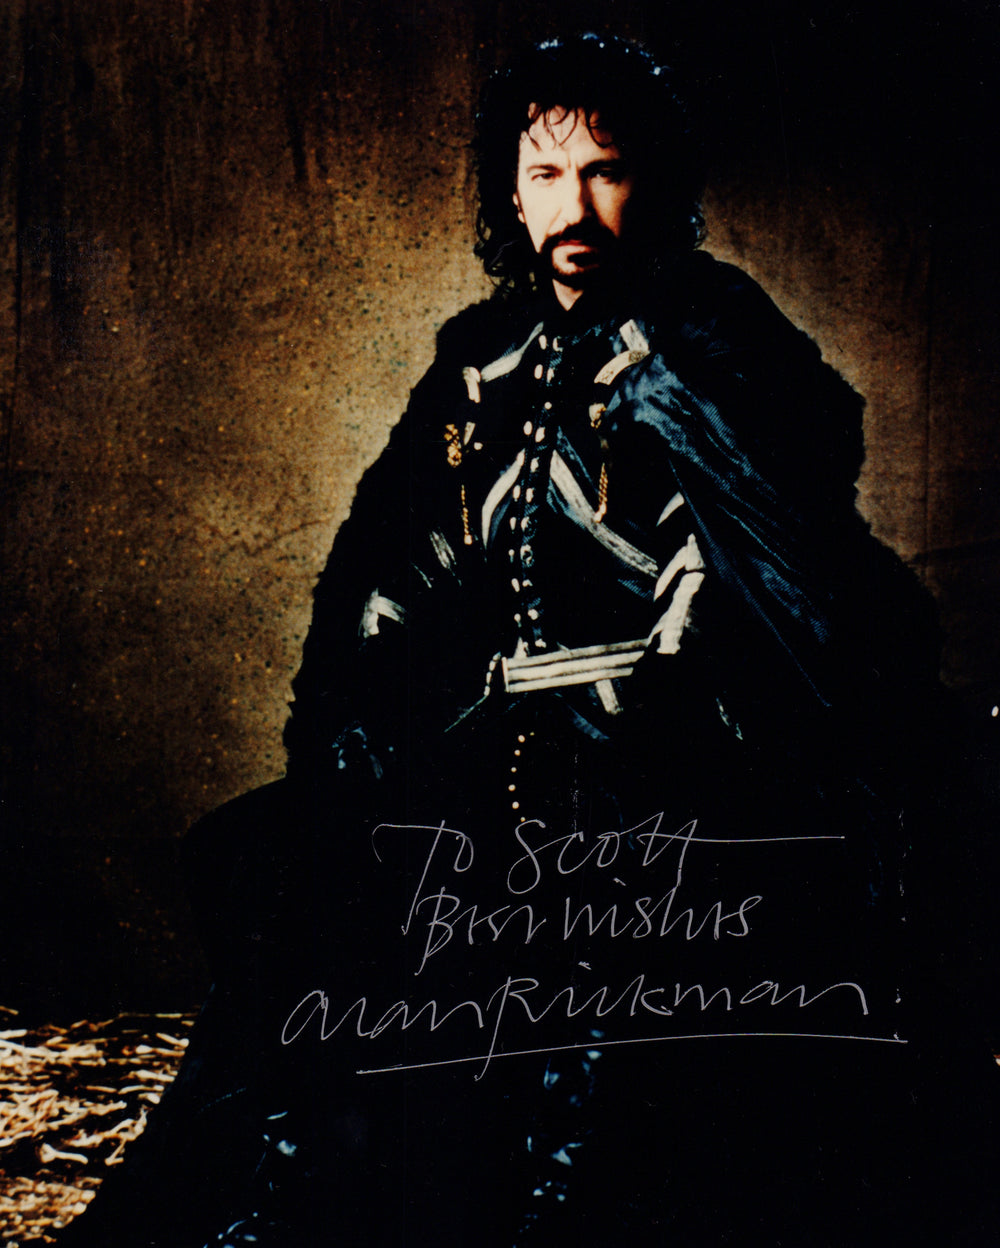 Alan Rickman as the Sheriff of Nottingham in Robin Hood: Prince of Thieves and from Die Hard & Harry Potter Signed 8x10 Photo